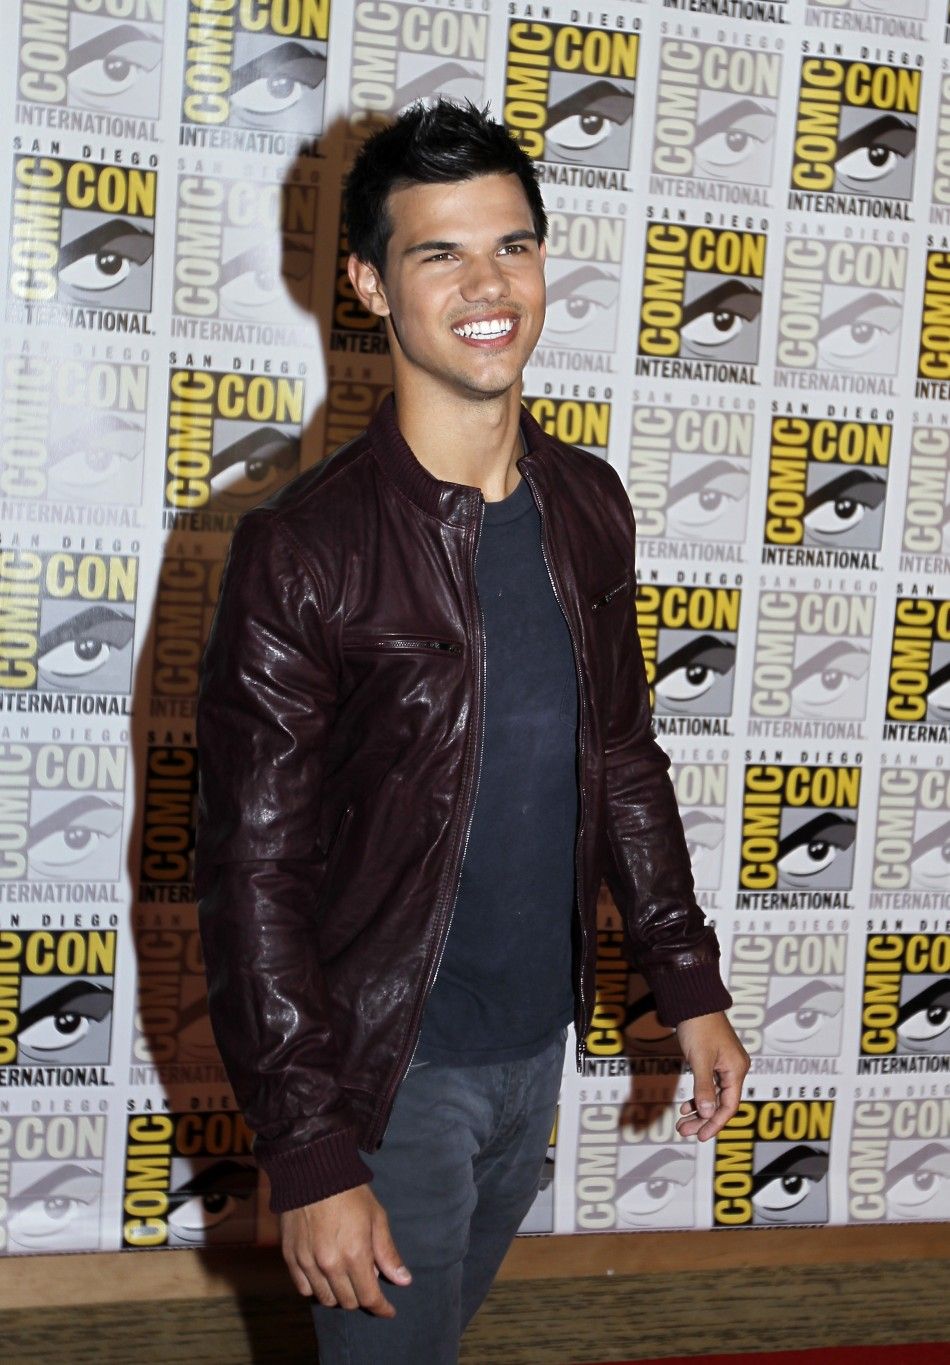 Actor Taylor Lautner poses to promote quotBreaking Dawnquot from the Twilight Saga at Comic Con in San Diego, California 